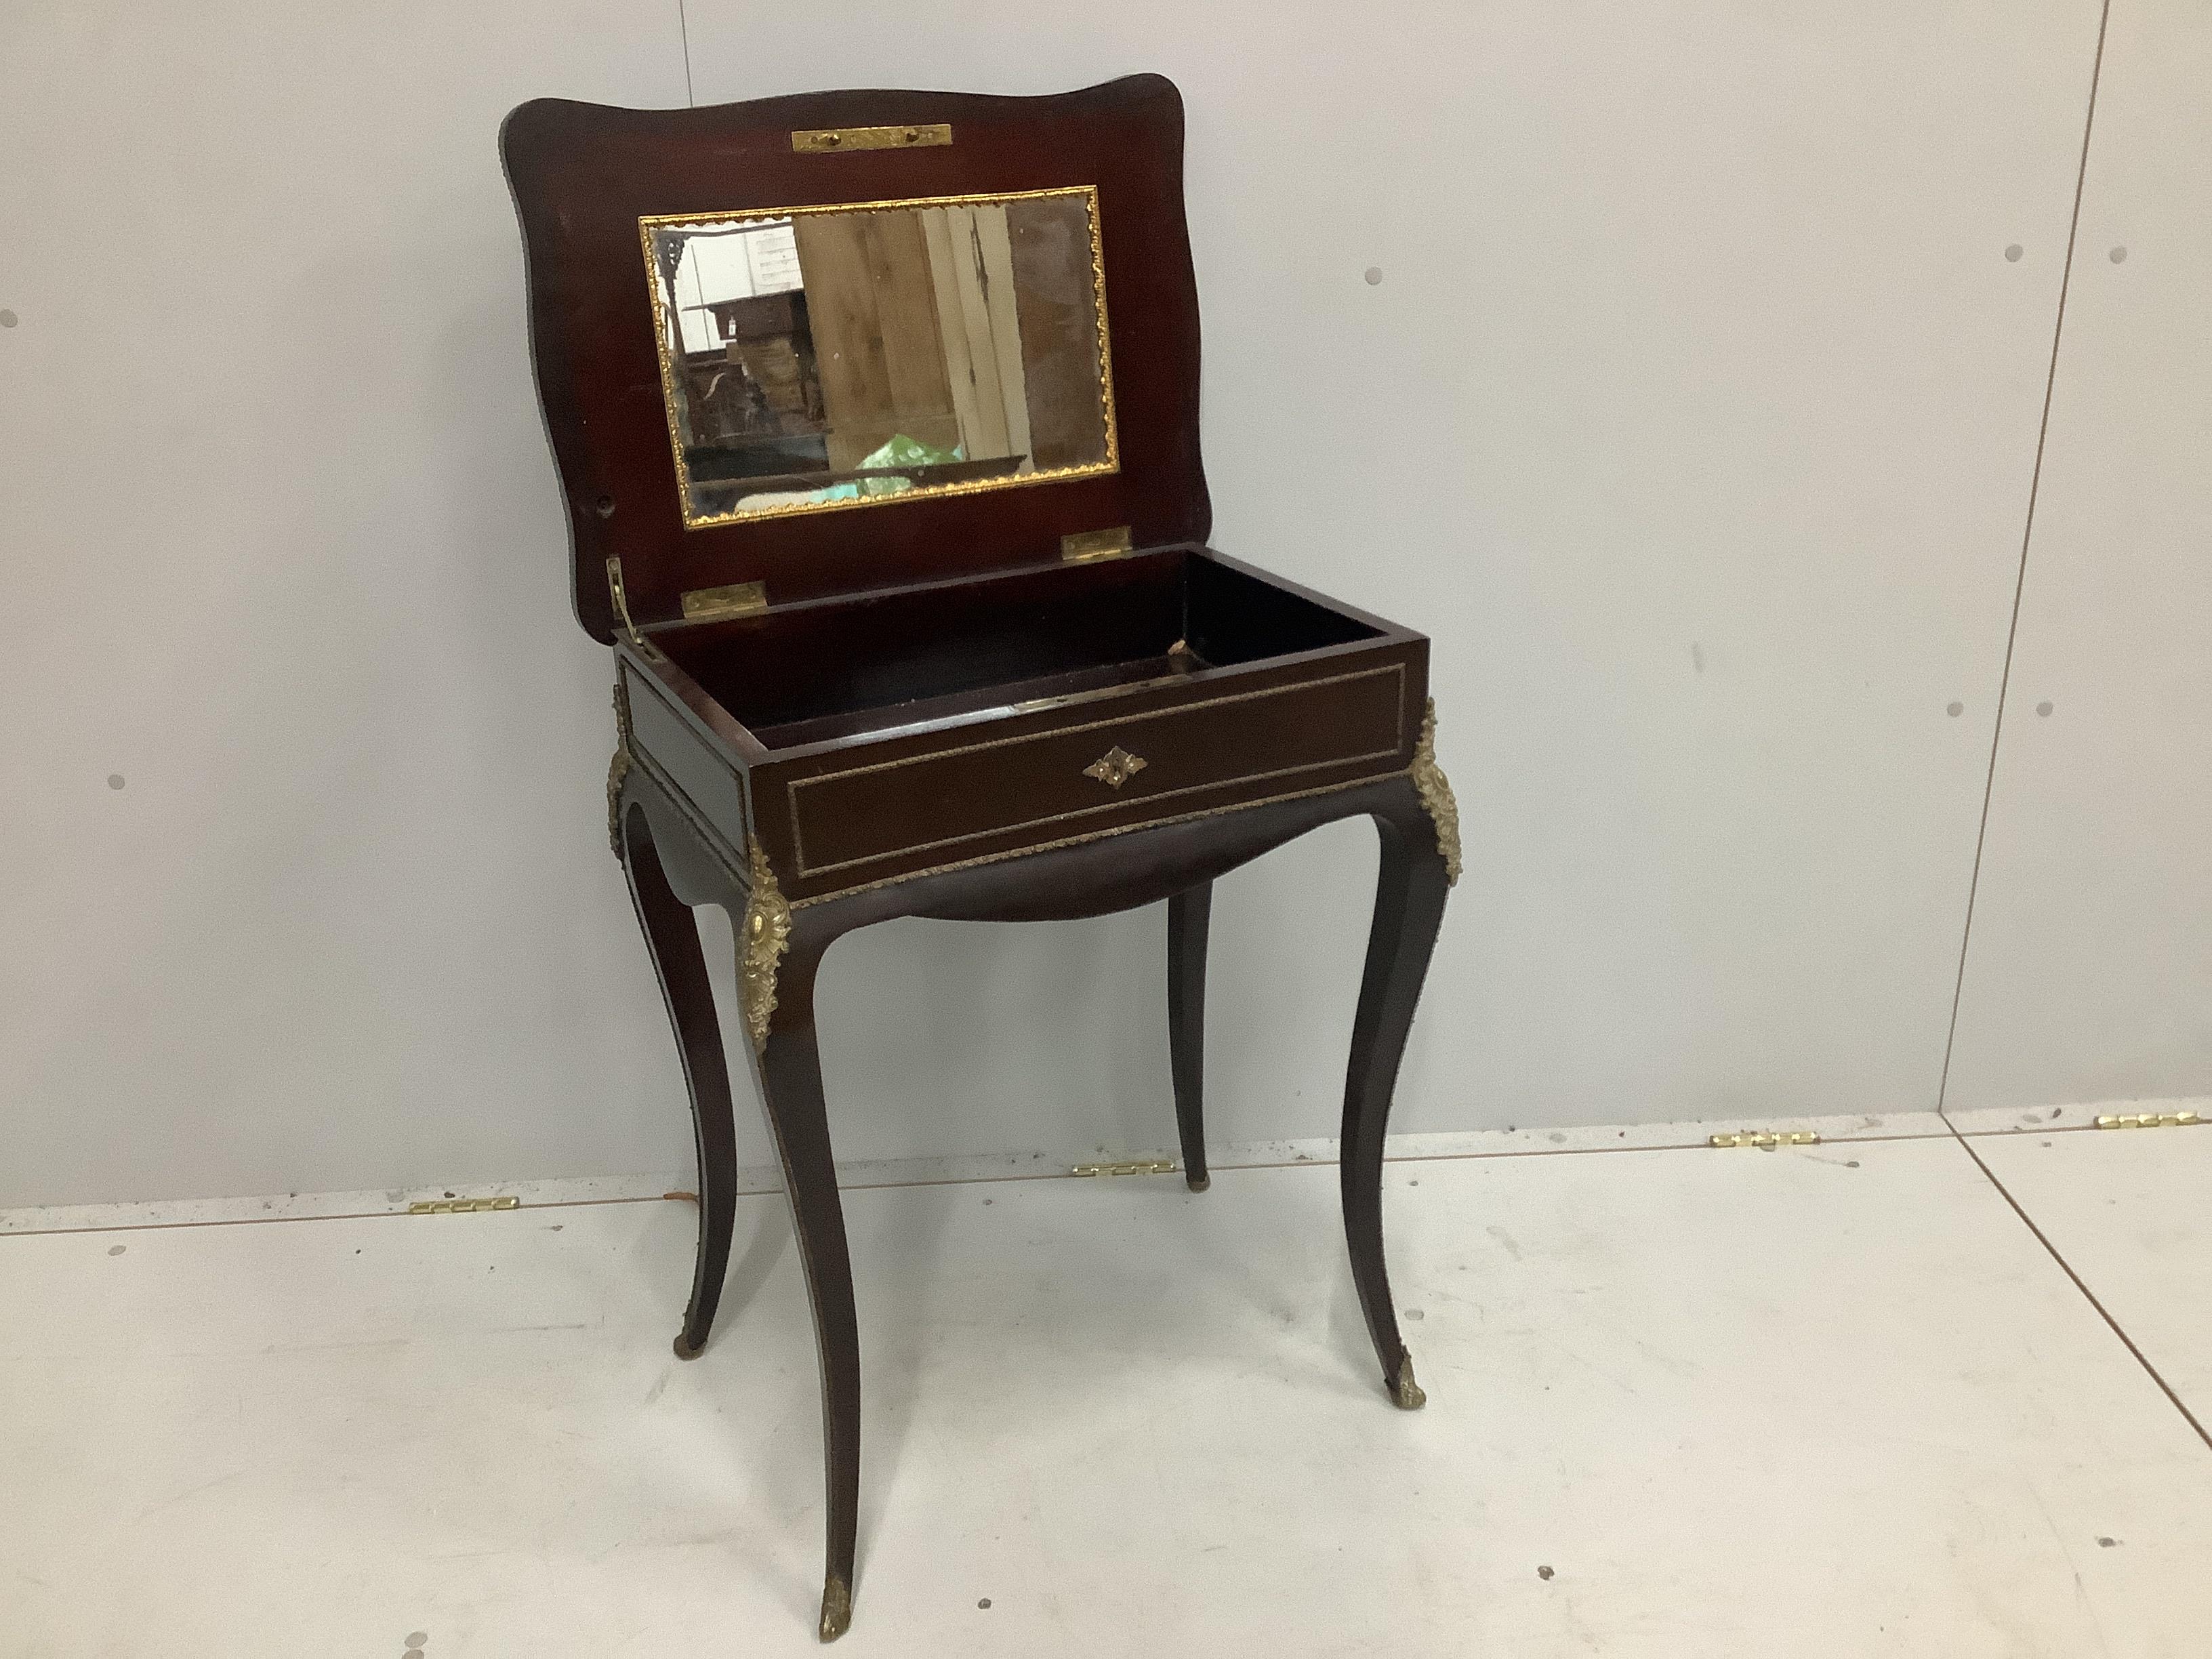 A 19th century French gilt metal mounted and brass inlaid enclosed dressing table, width 57cm, depth 41cm, height 72cm